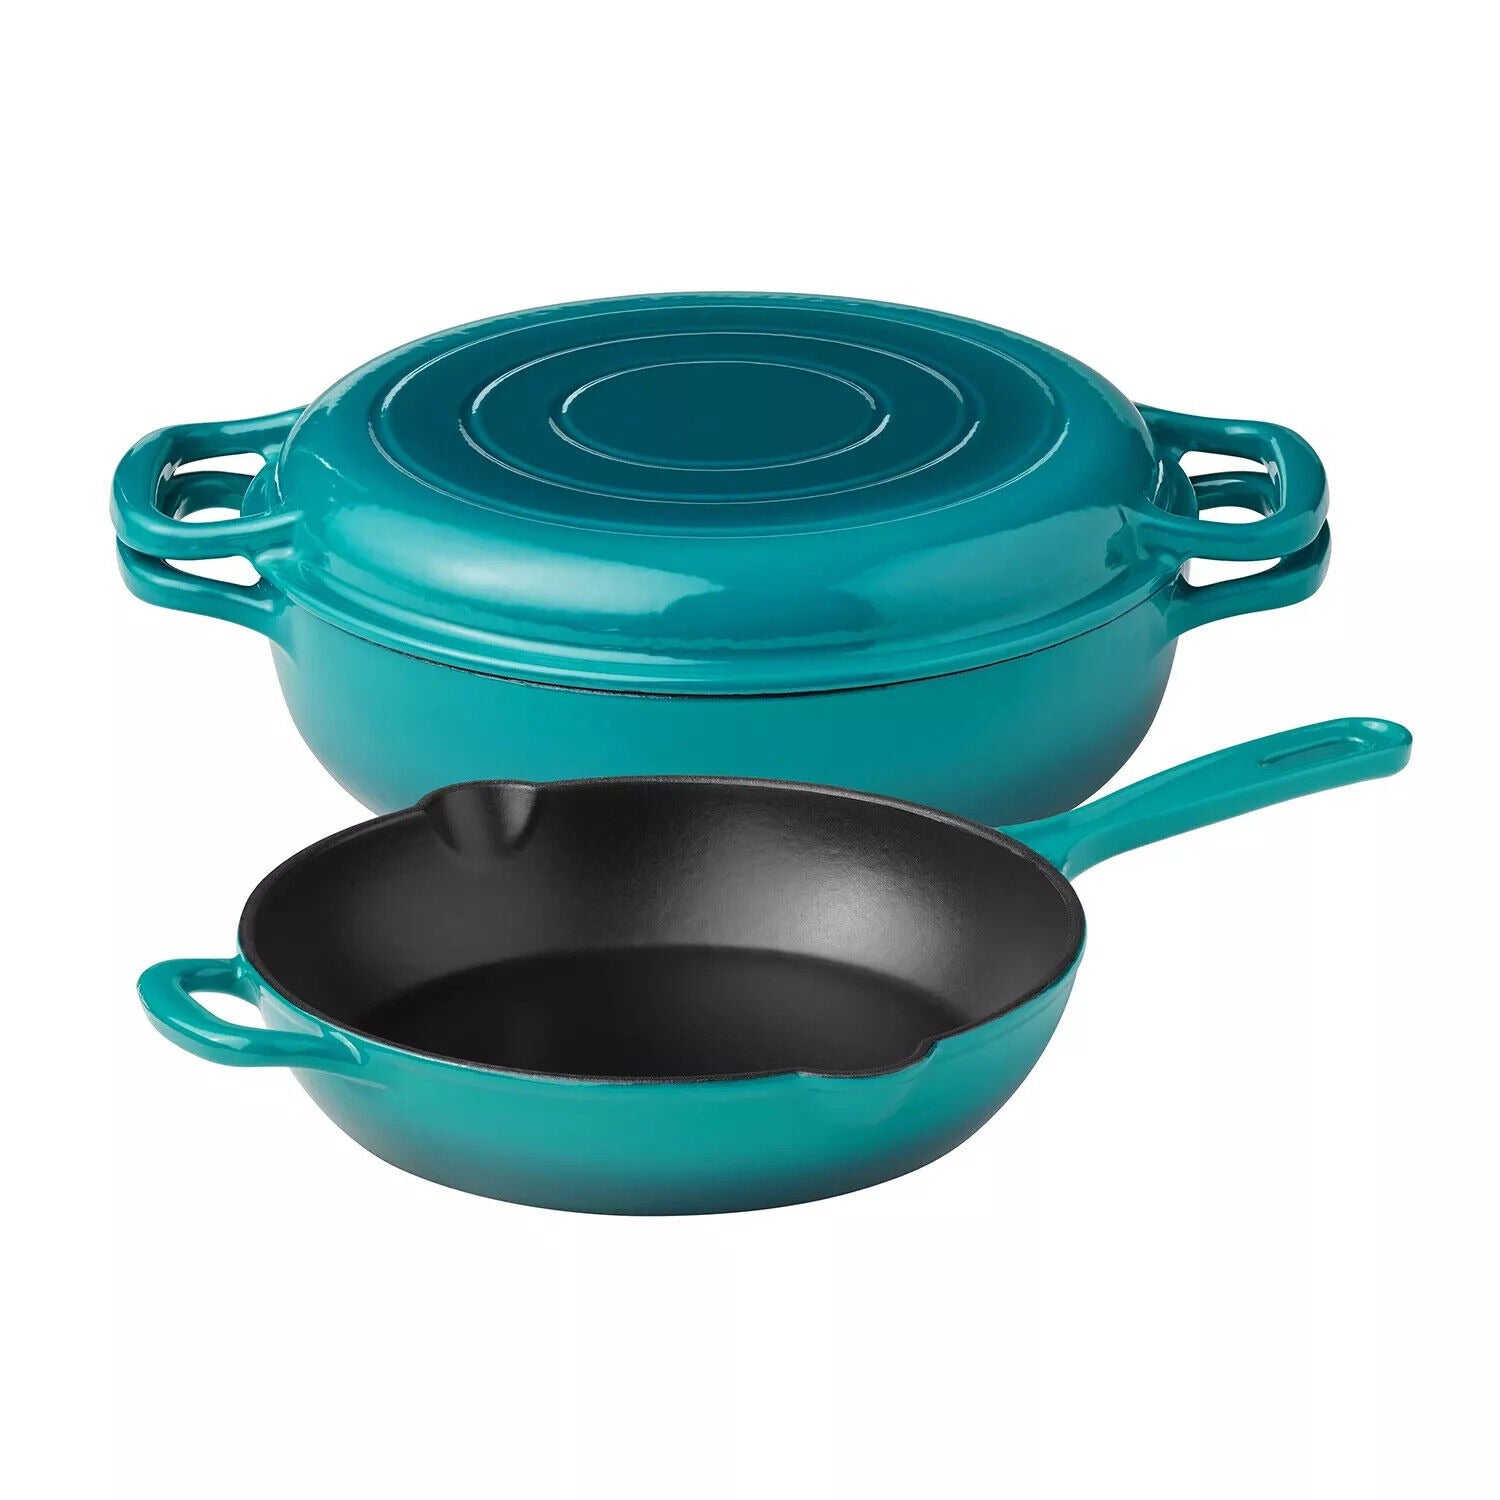 Tramontina Dutch Oven Set, 2-Pack ( Teal ) in Airport Residential Area -  Kitchenware & Cookware, Symboshopping Online